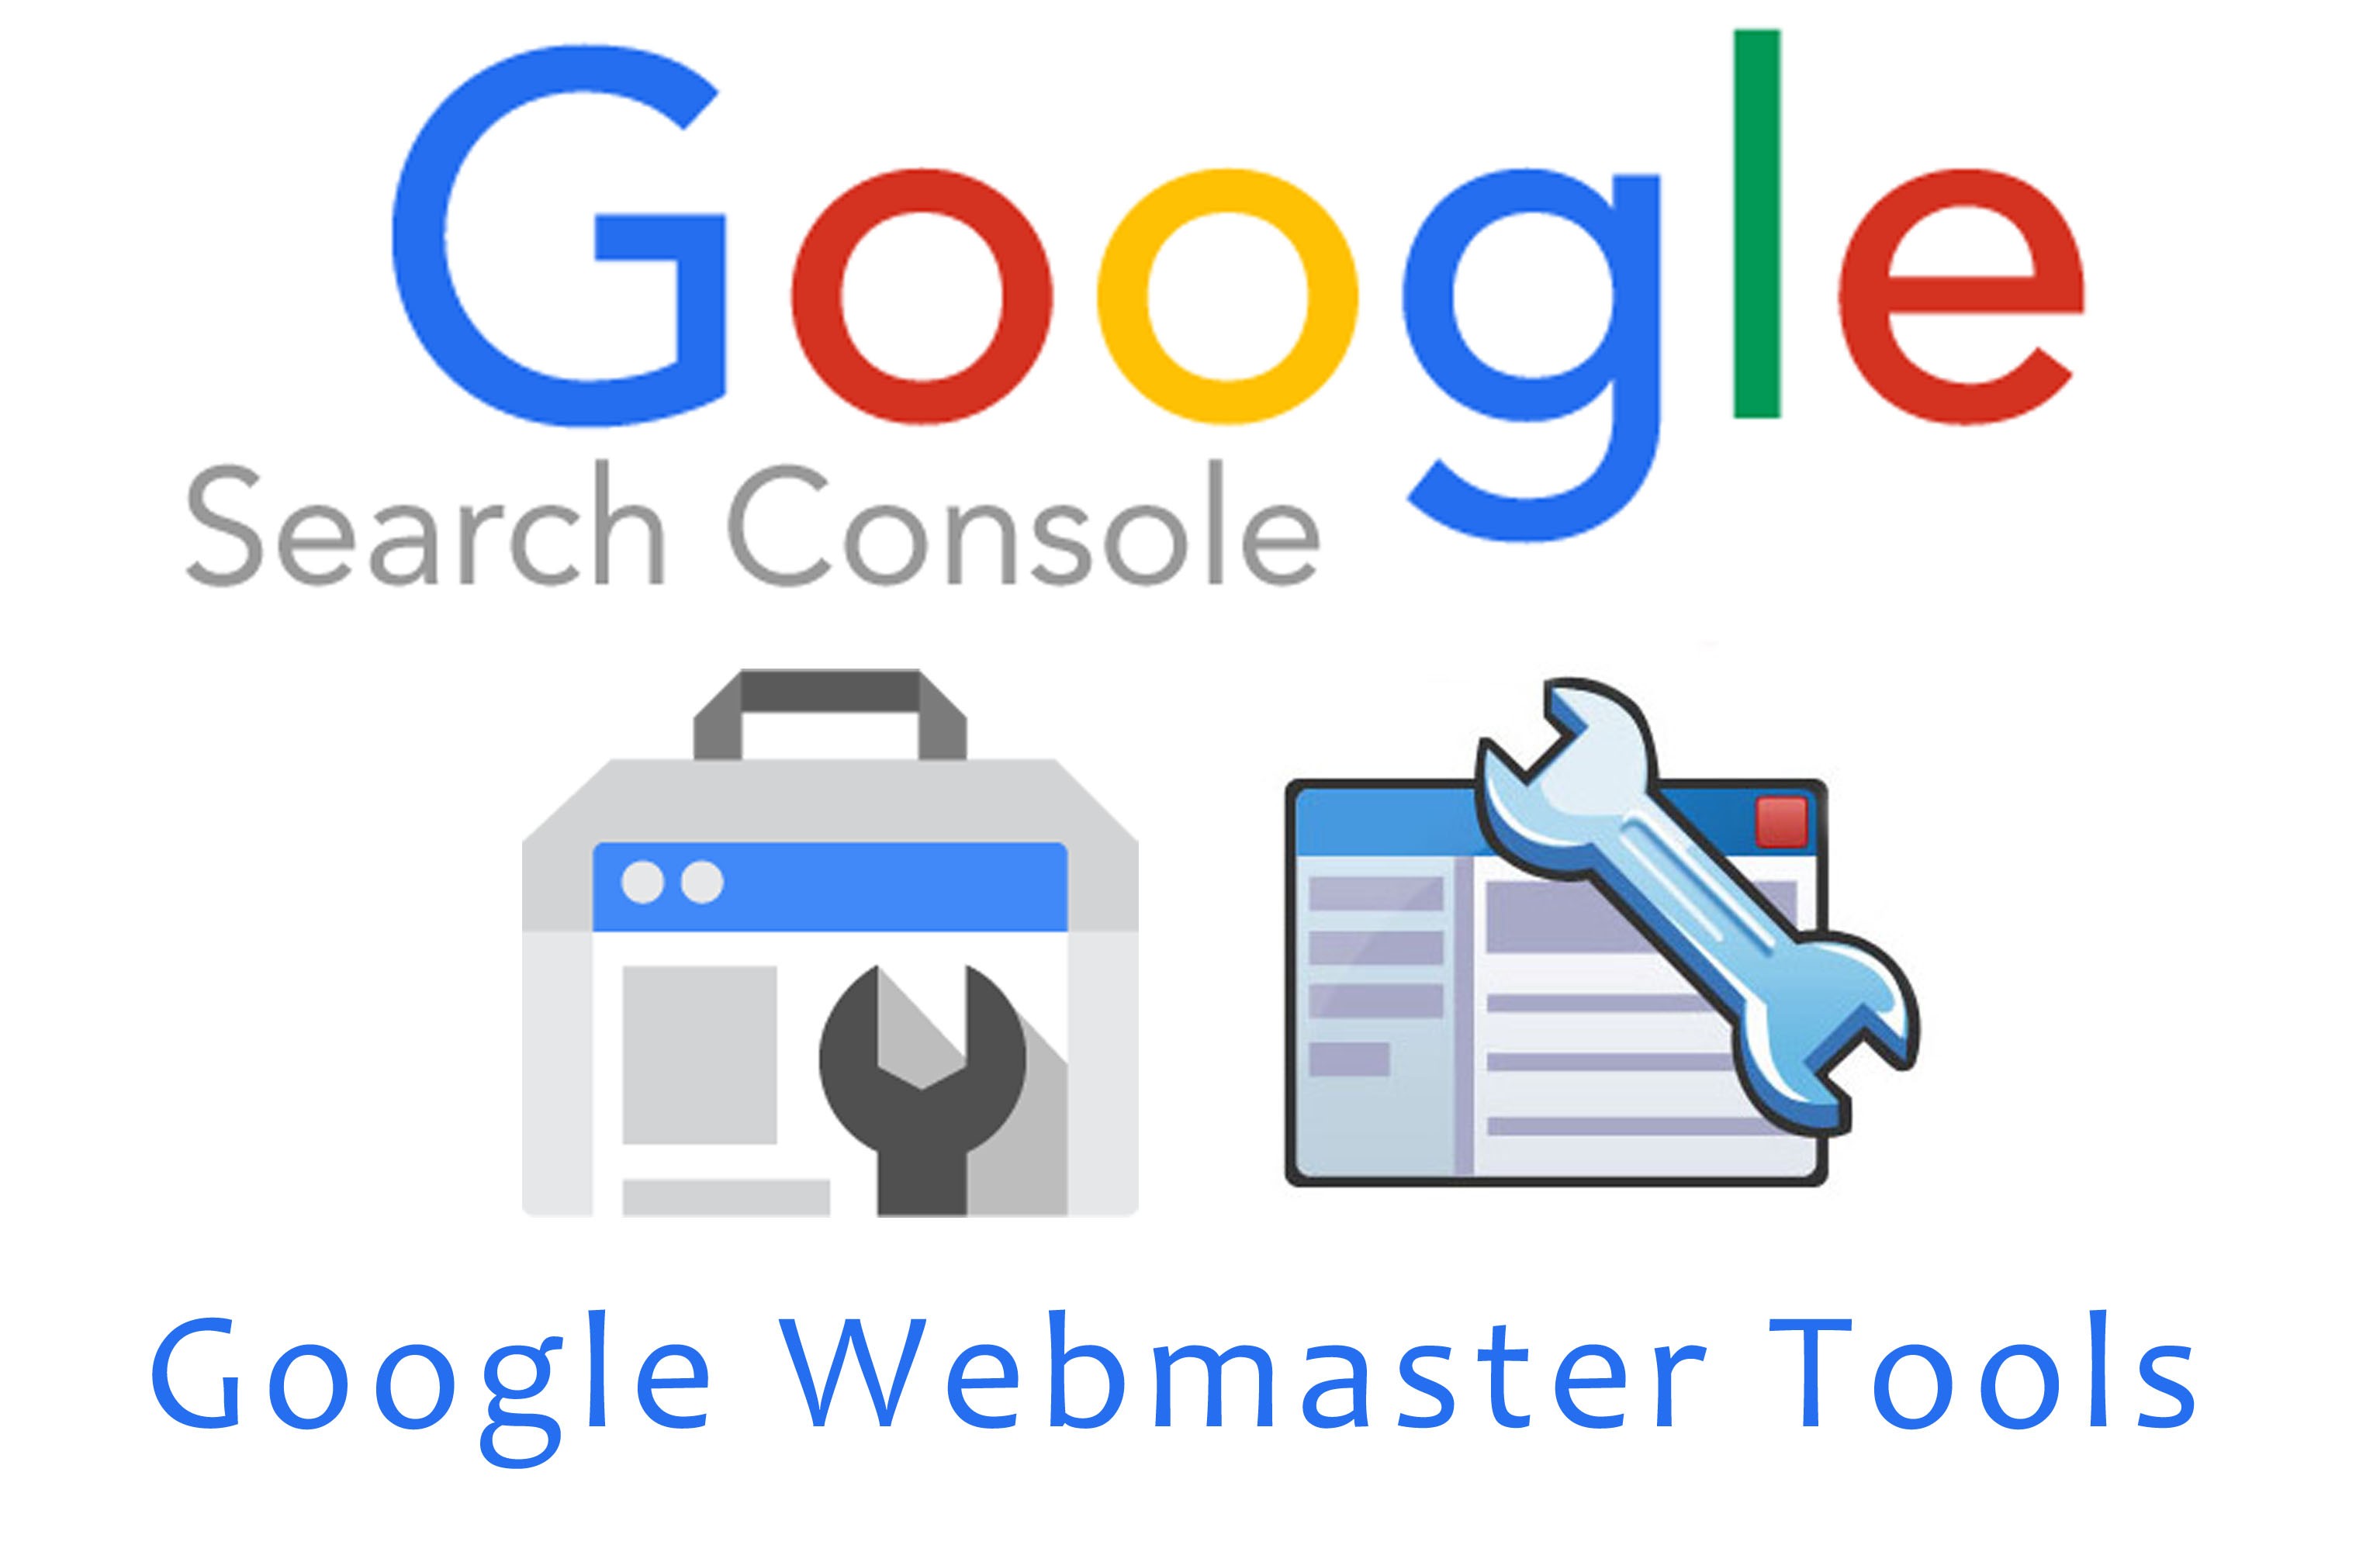 How to use Google Webmaster tool or Search Console to Submit Your Website URL